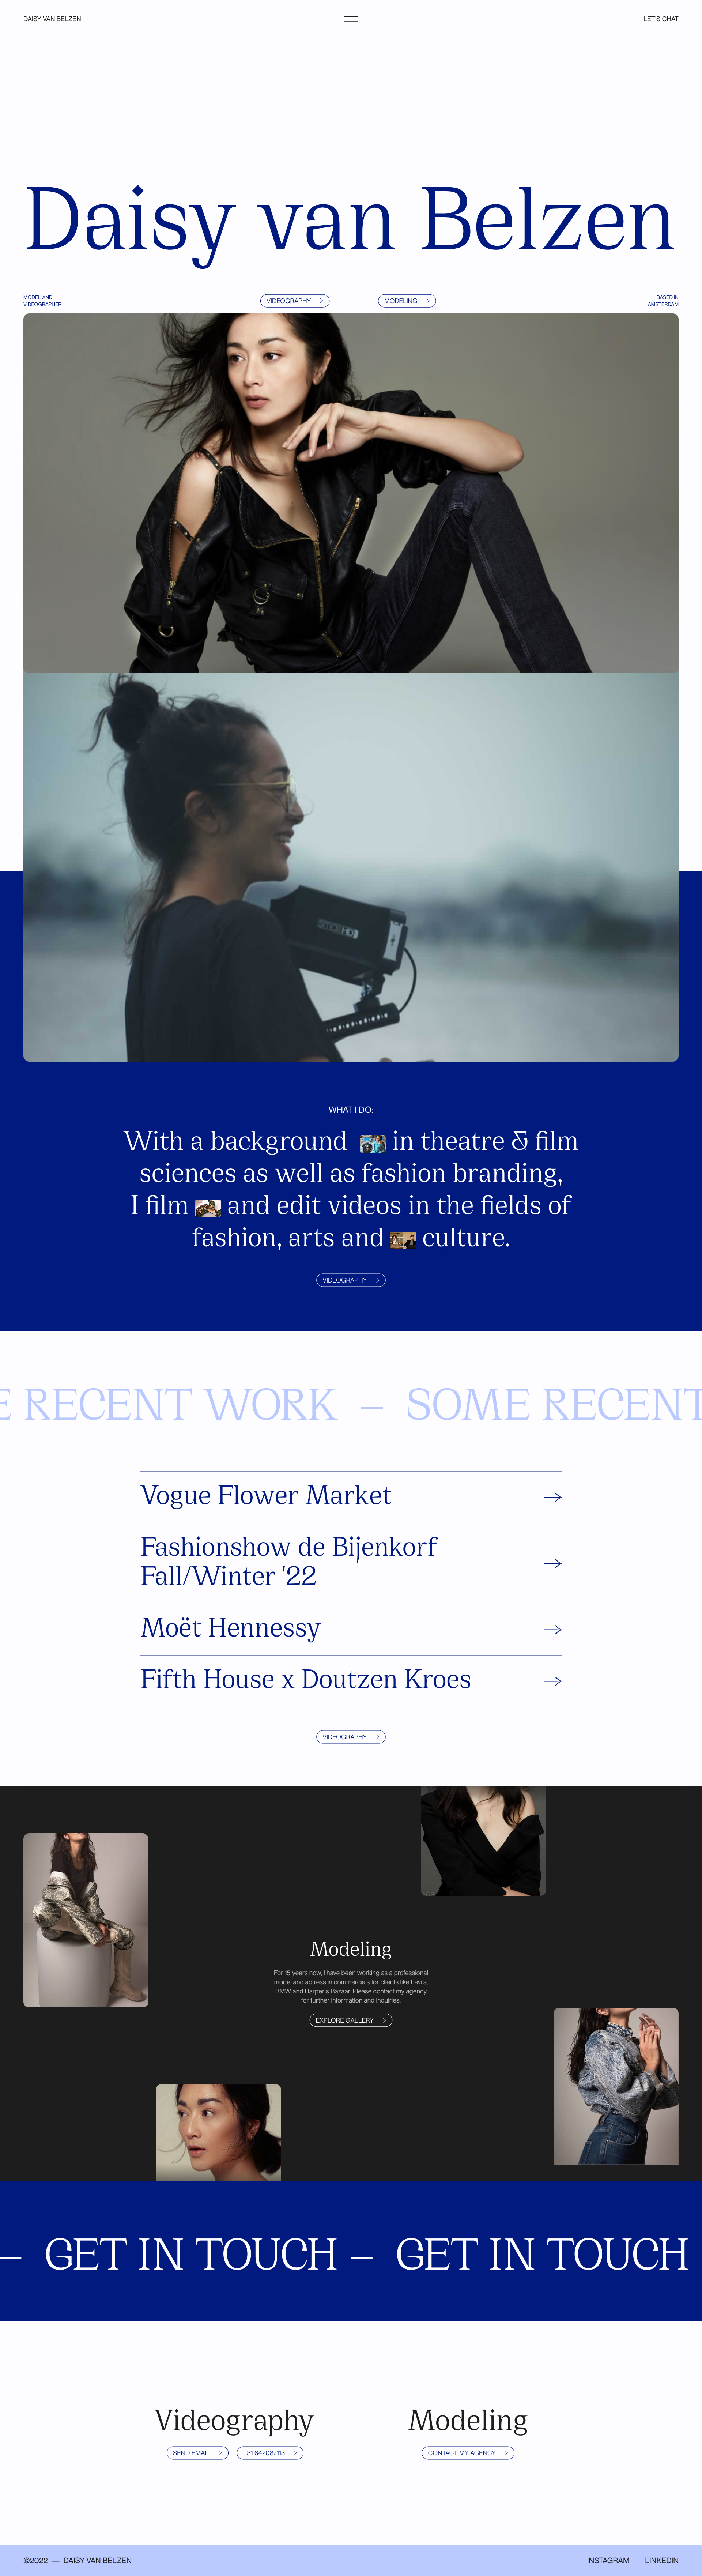 Daisy van Belzen Landing Page Example: With a background in theatre & film sciences as well as fashion branding, I film and edit videos in the fields of fashion, arts and culture.